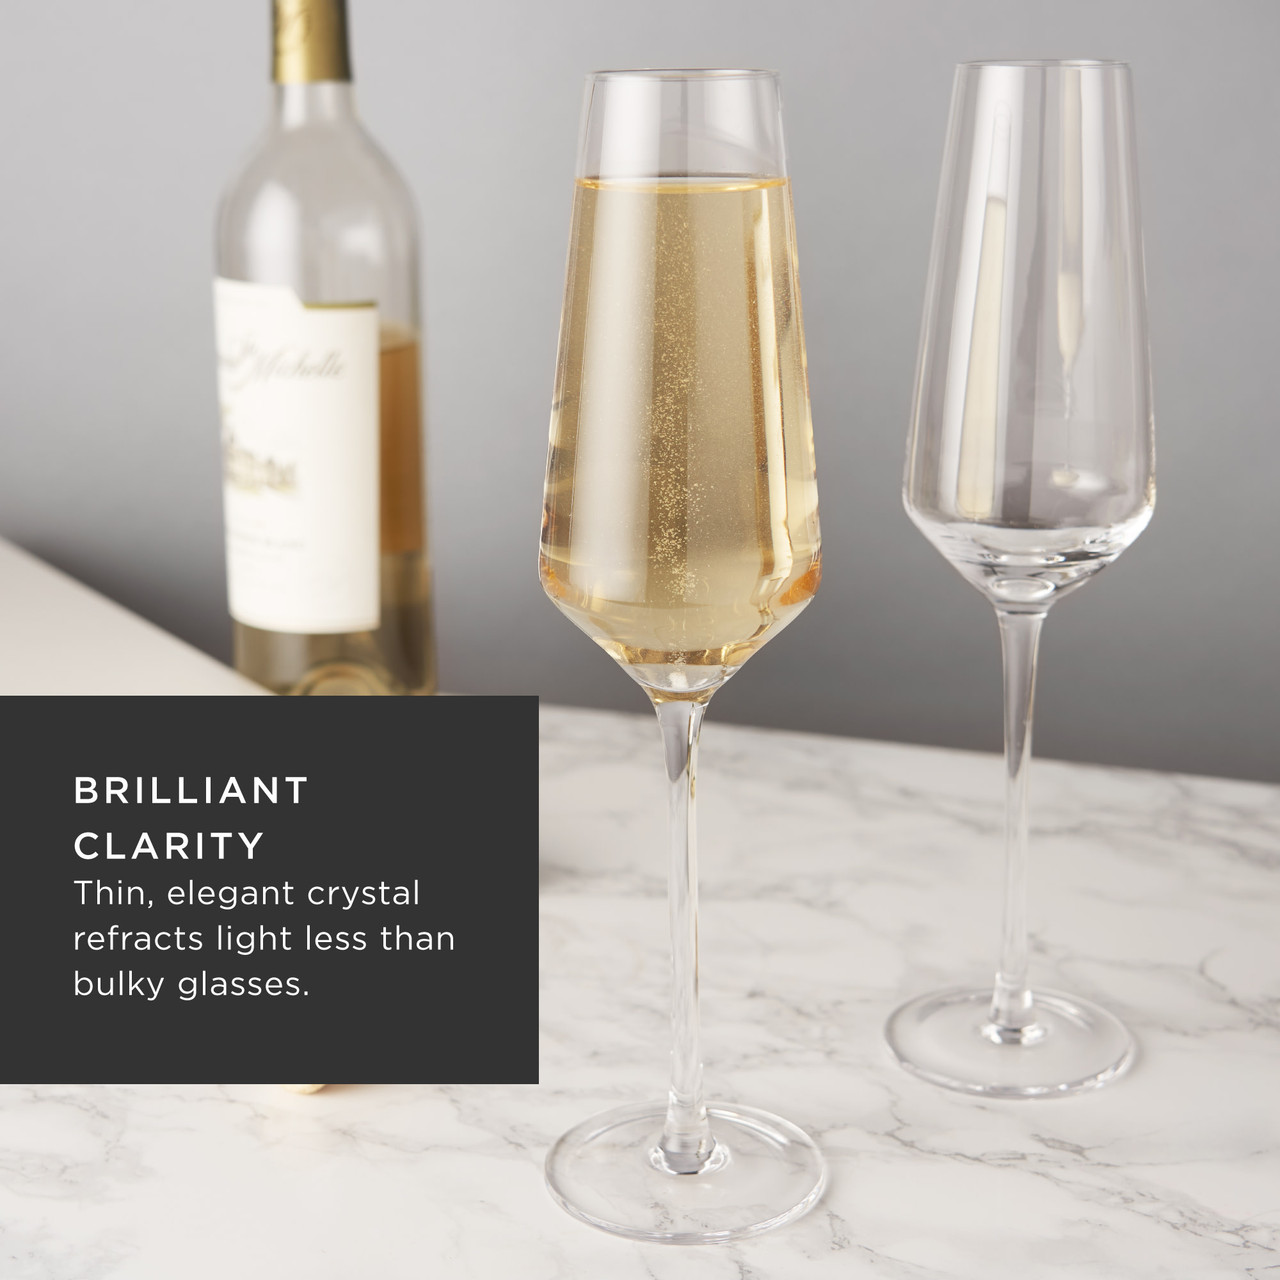 https://cdn11.bigcommerce.com/s-oo0gdojvjo/images/stencil/1280x1280/products/68543/101628/angled-crystal-champagne-flutes-by-viski-set-of-2-3__17372.1683797265.jpg?c=2&imbypass=on